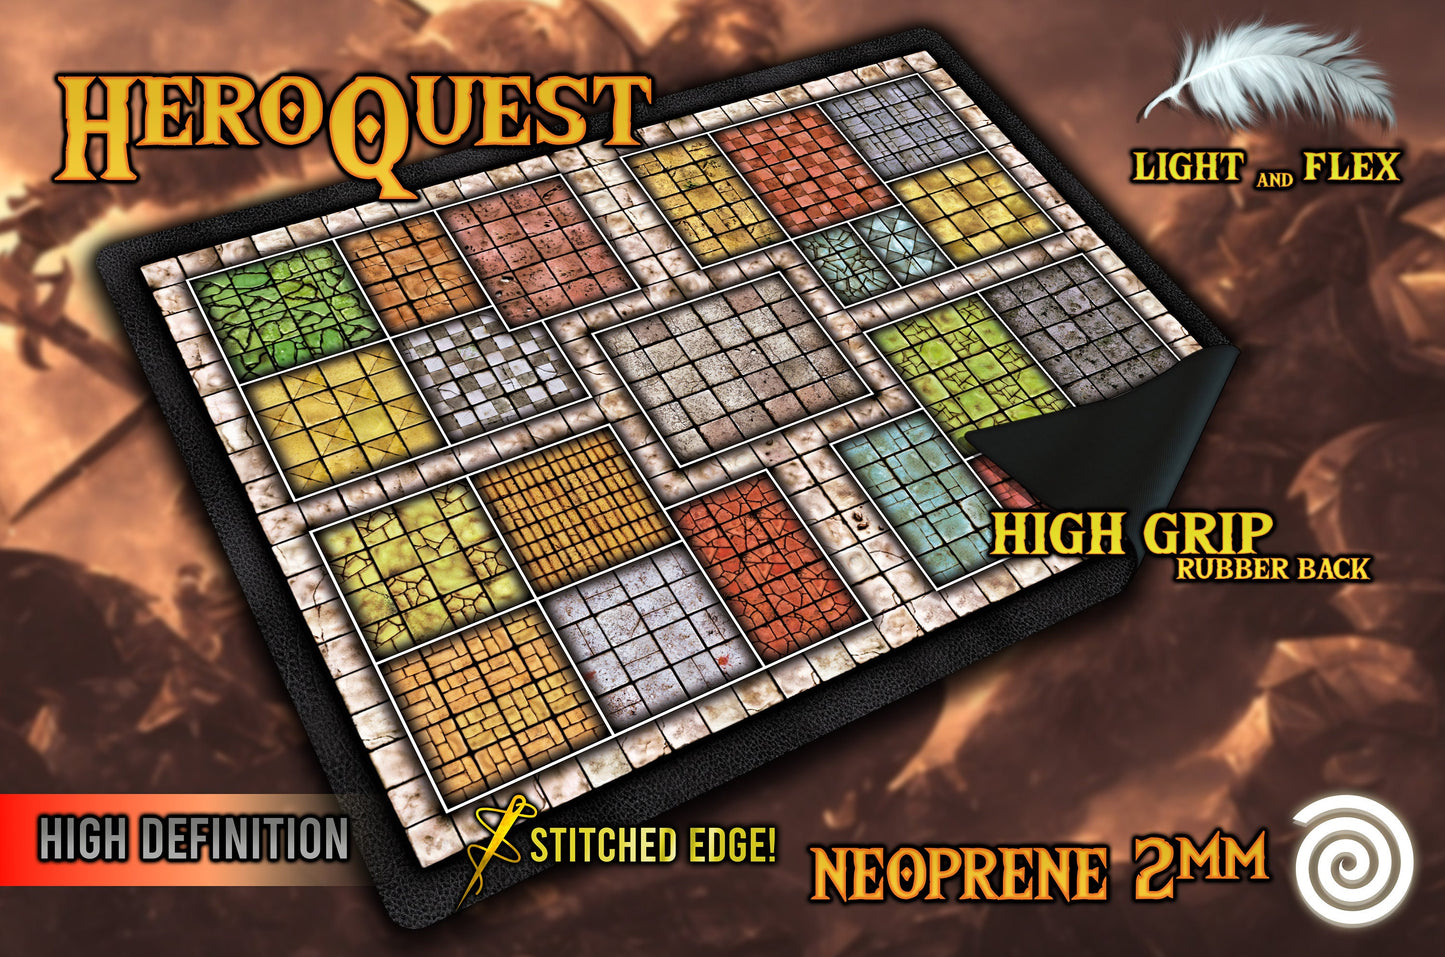 Tapete especial Remake para HeroQuest ( 2 pasillos)UNOFFICIAL PRODUCT